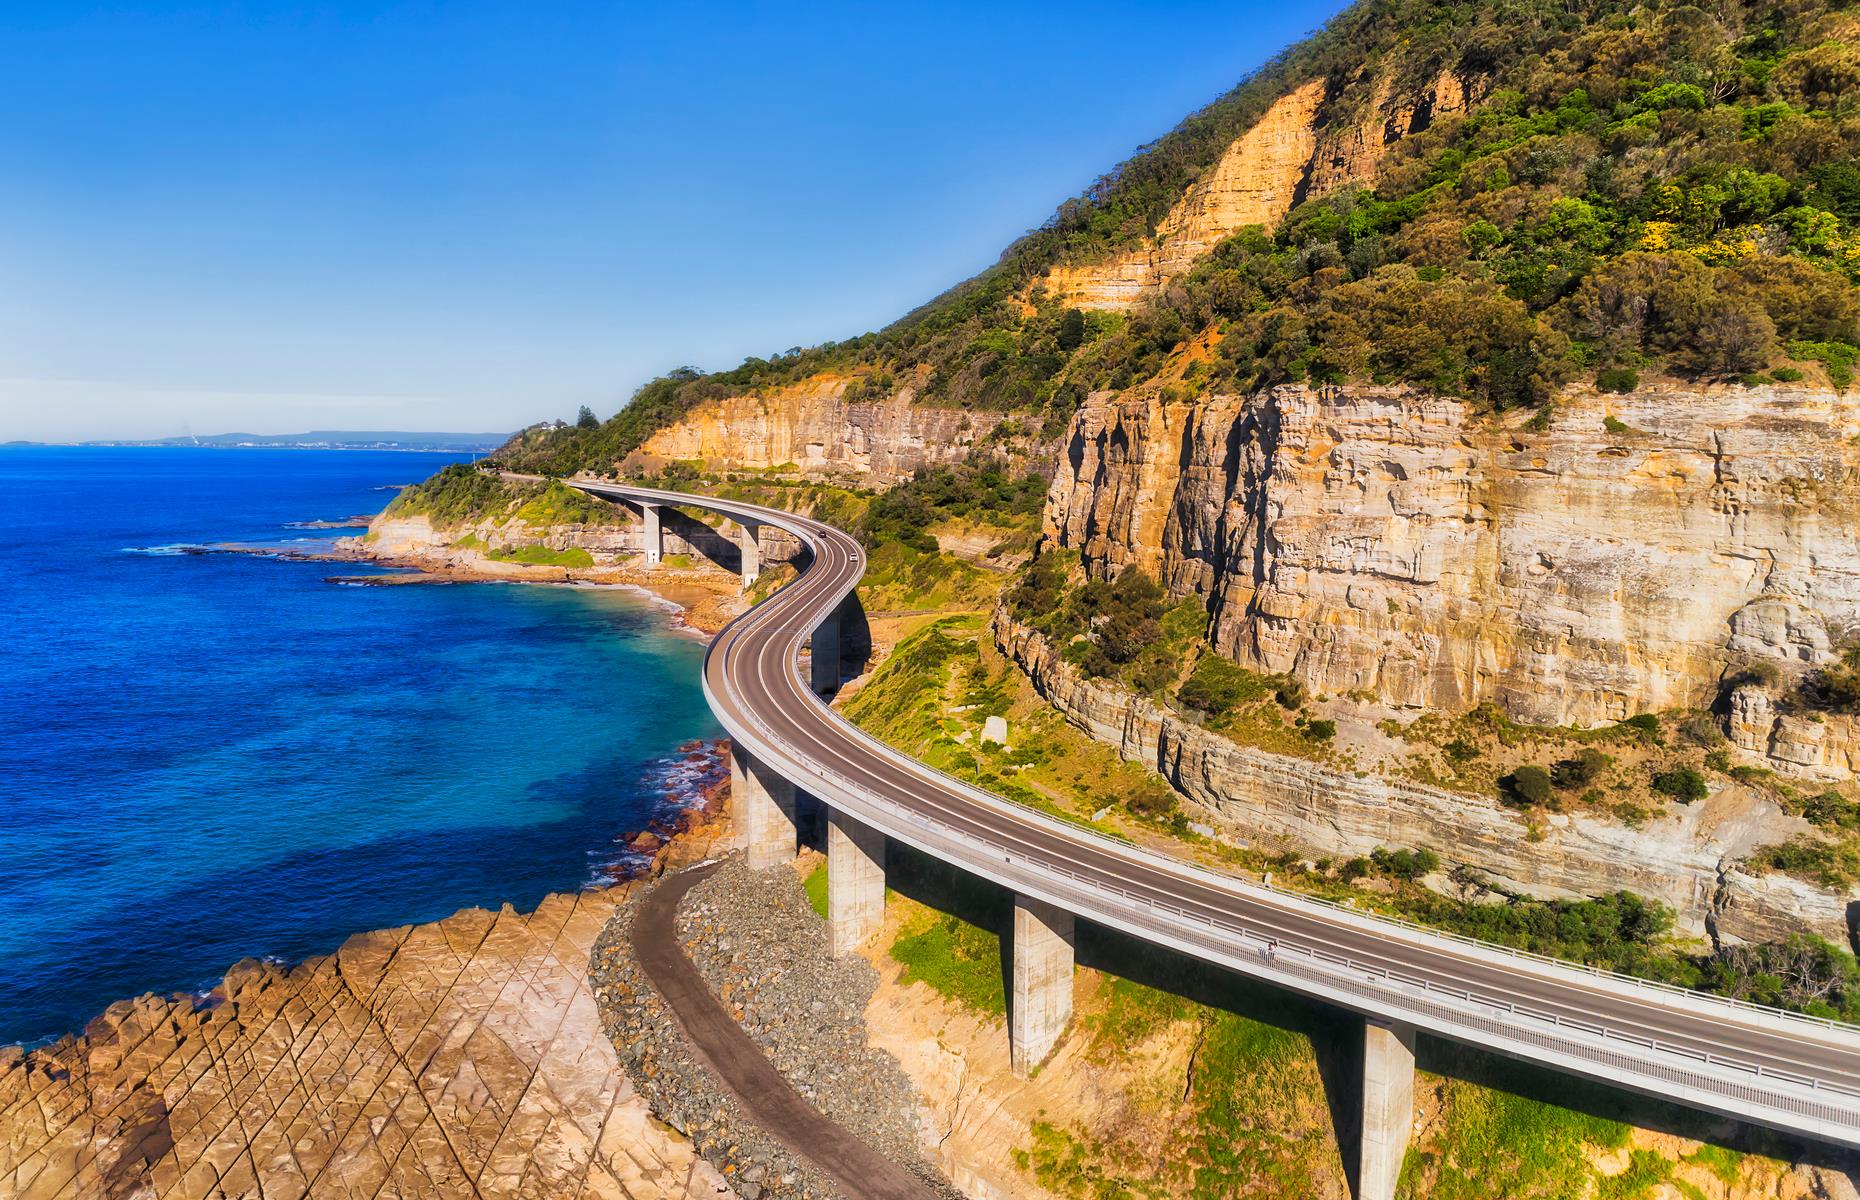 <p>Stretching 87 miles (140km) south from Sydney, the Grand Pacific Drive is a blockbuster of a coastal route. First up is the Royal National Park, the oldest in Australia, with its walking trails to wild beaches. The highway continues south, over the famously photogenic Sea Cliff Bridge, which bends around towering cliffs and past the coastal towns of Wollongong, Shellharbour and Kiama. Stay overnight here and follow the Kiama Coastal Walk to see its famous blowhole, surf beaches and pretty bays – the lesser known Little Blowhole lies further south.</p>  <p><strong><a href="https://www.loveexploring.com/galleries/92044/australias-most-stunning-coastal-towns?page=1">Australia's most stunning coastal towns</a></strong></p>